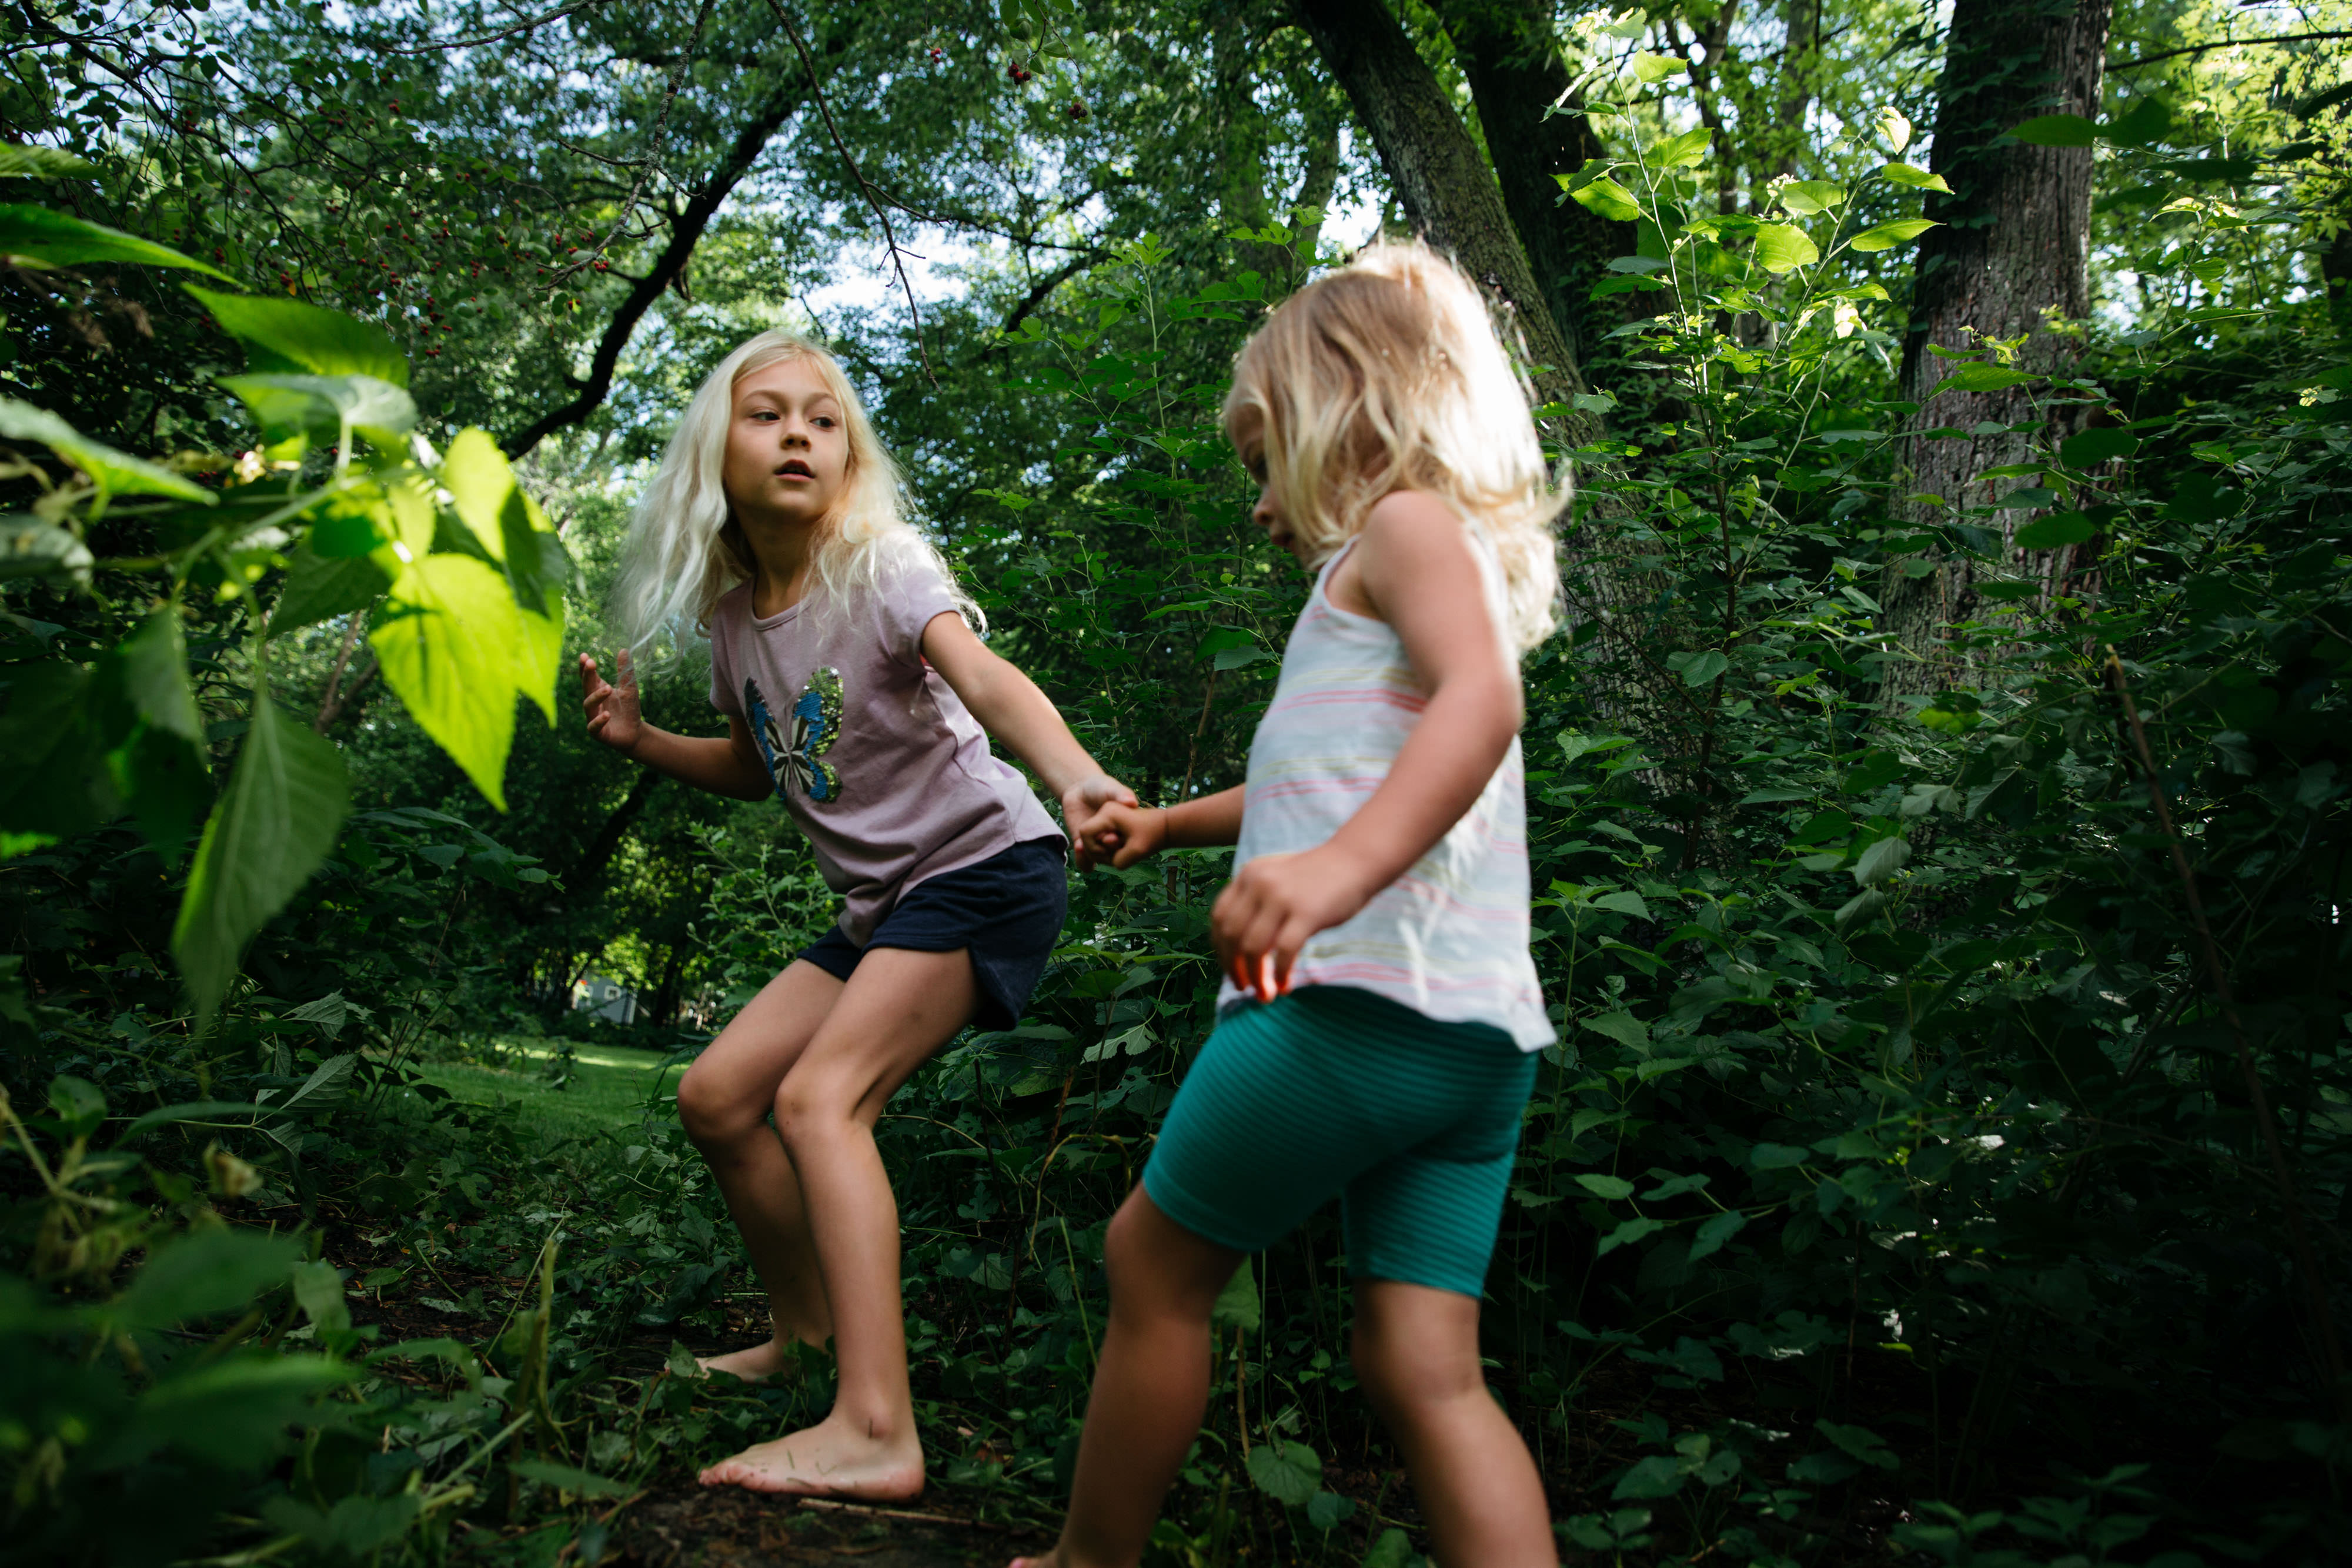 A barefoot girl reaches for the hand of a younger also barefoot girl to draw her through a gap in some bushes.